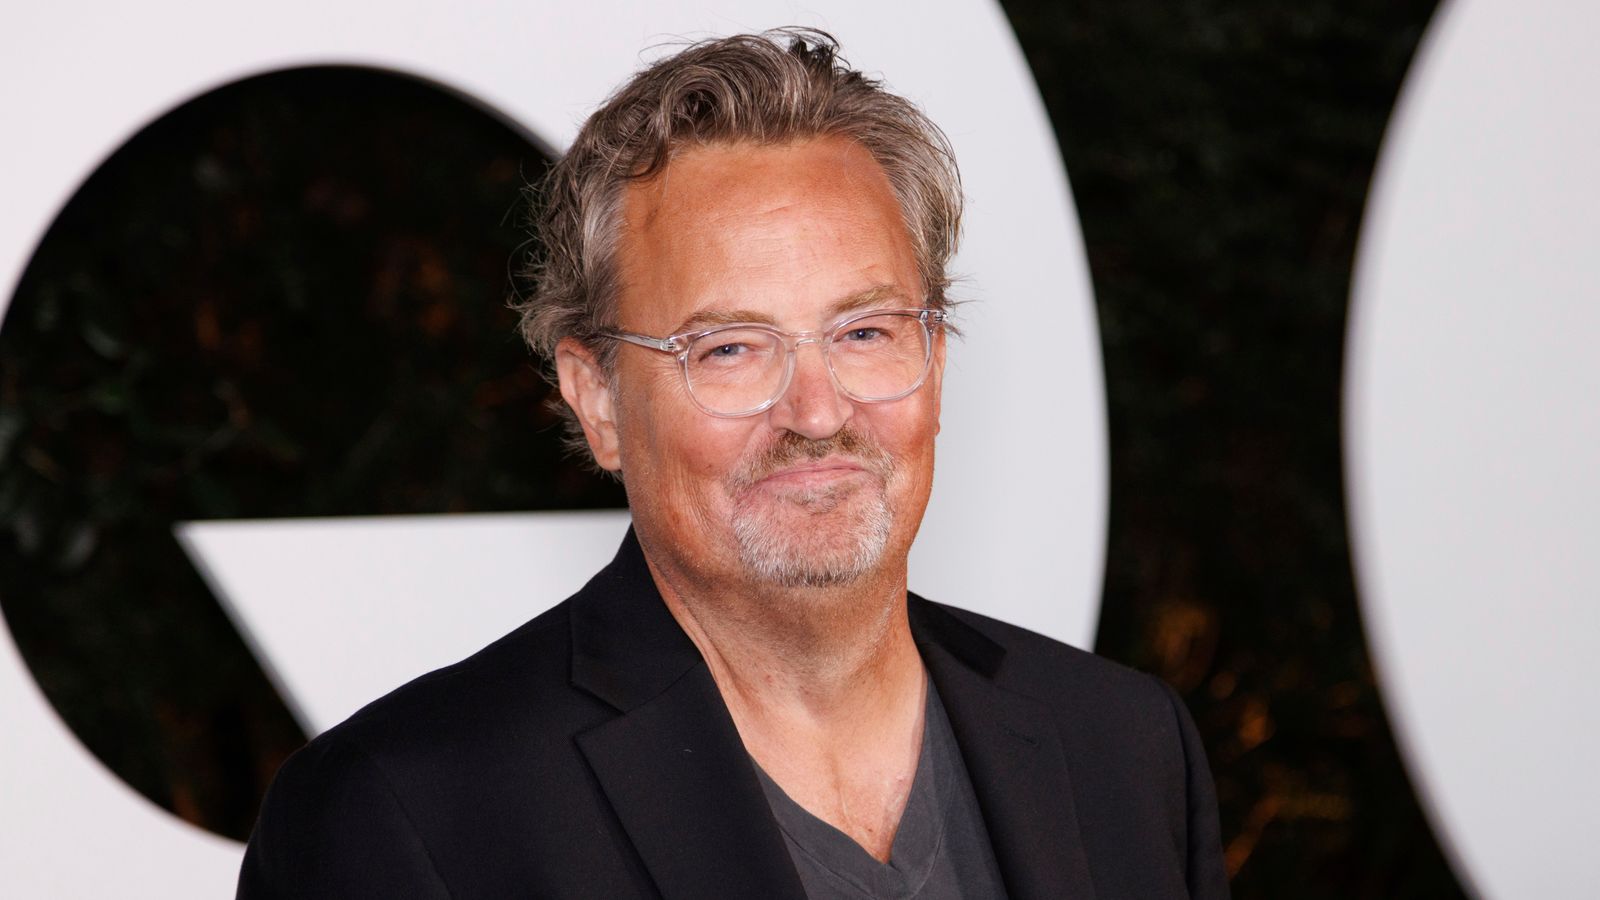 Matthew Perry's X account 'hacked by fraudsters' urging donation to fake foundation